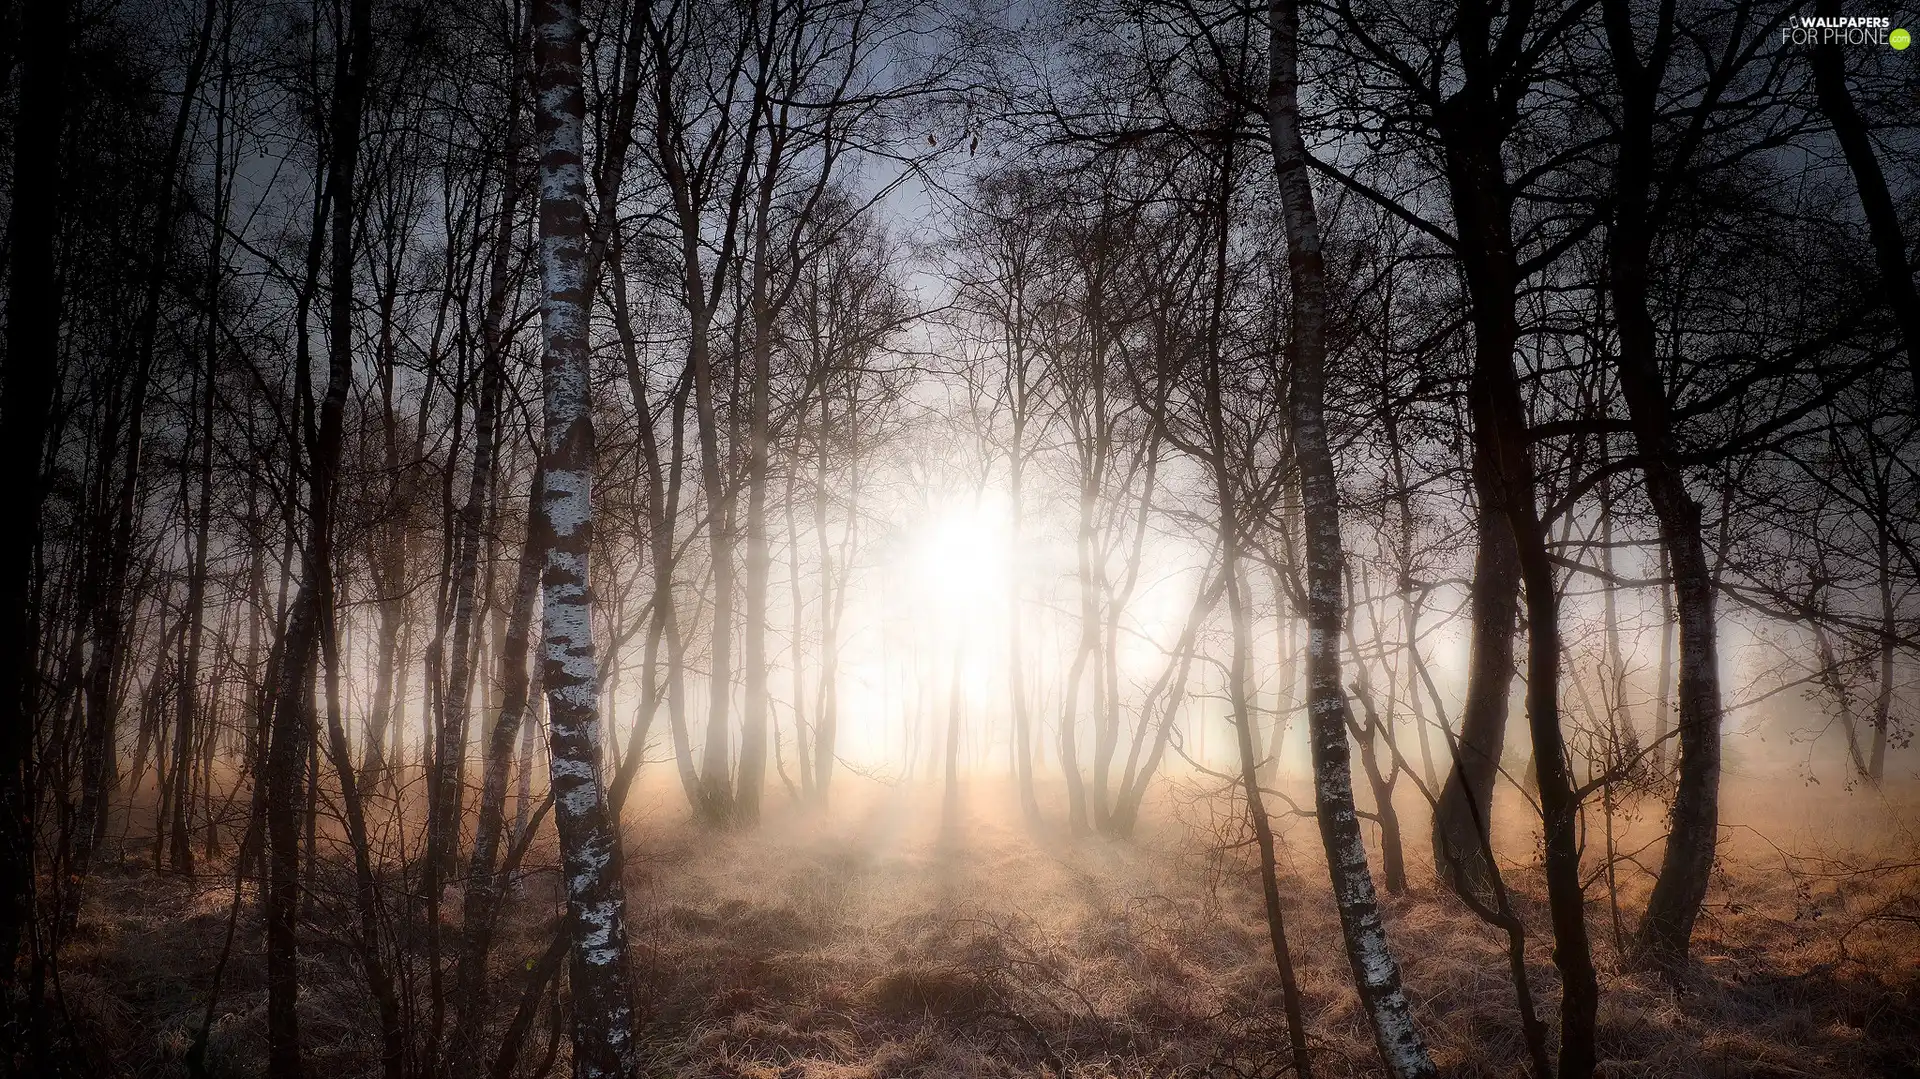 birch, trees, light breaking through sky, viewes, forest, autumn, Fog